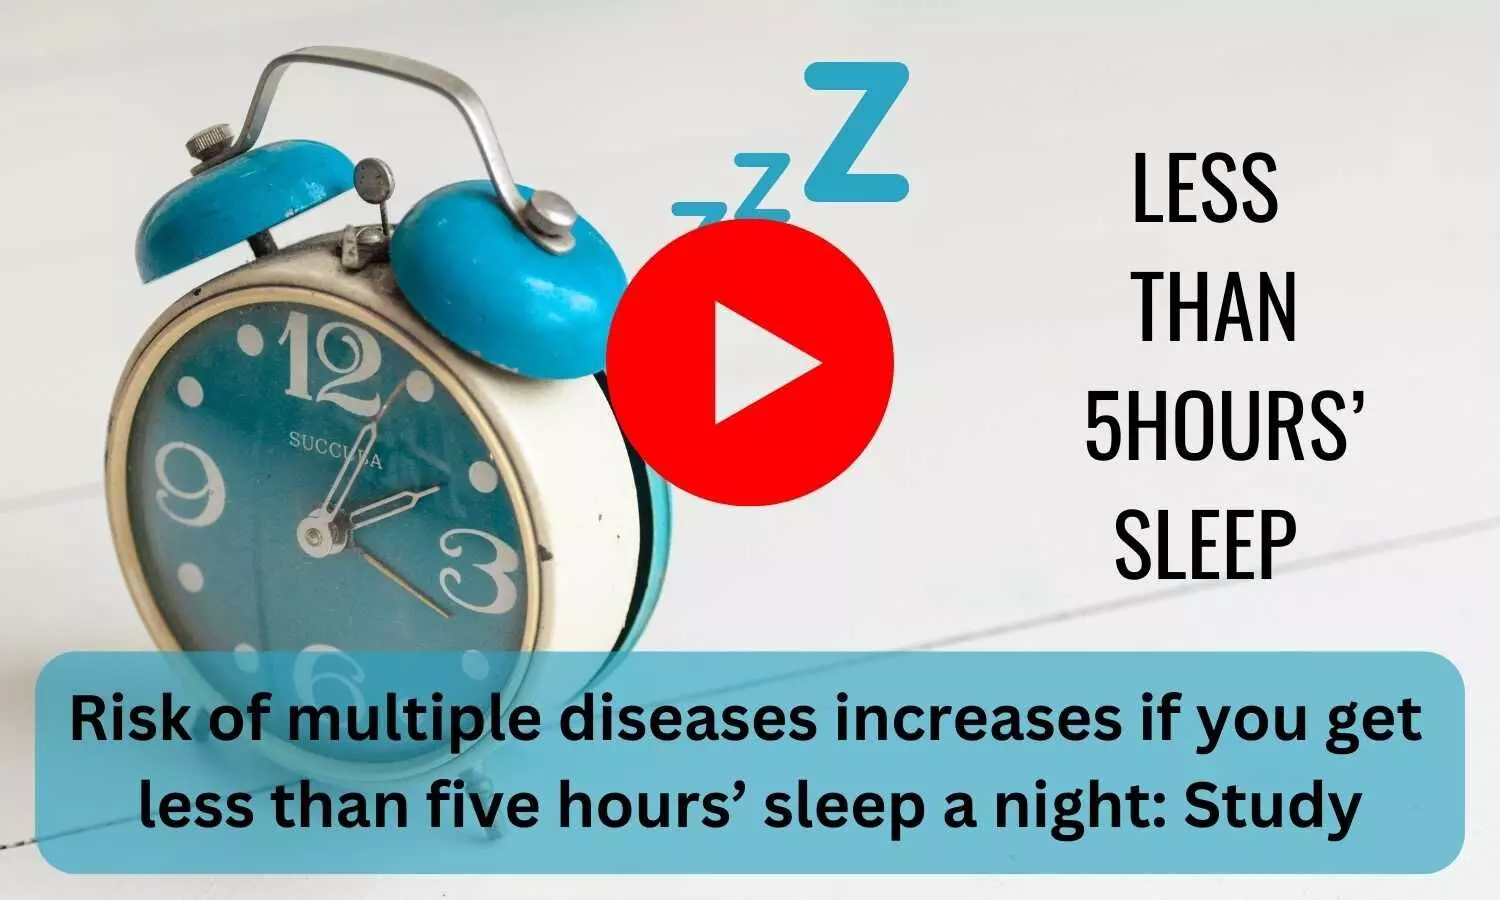 Risk of multiple diseases increases if you get less than five hours sleep a night: Study